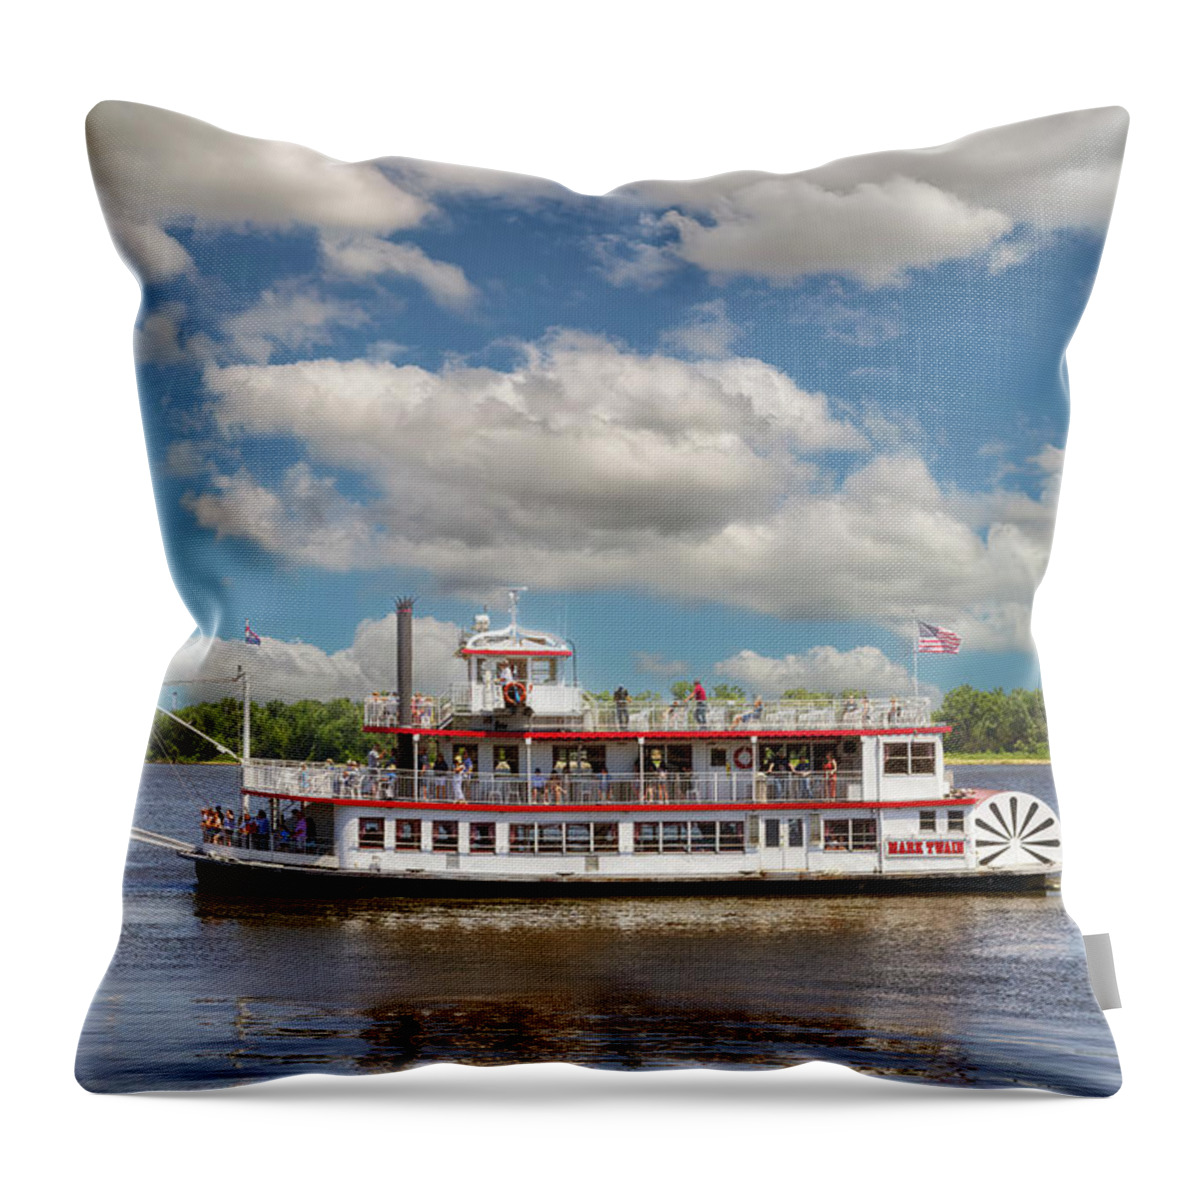 Mark Twain Riverboat Throw Pillow featuring the photograph Mark Twain Riverboat - Hannibal, Missouri by Susan Rissi Tregoning